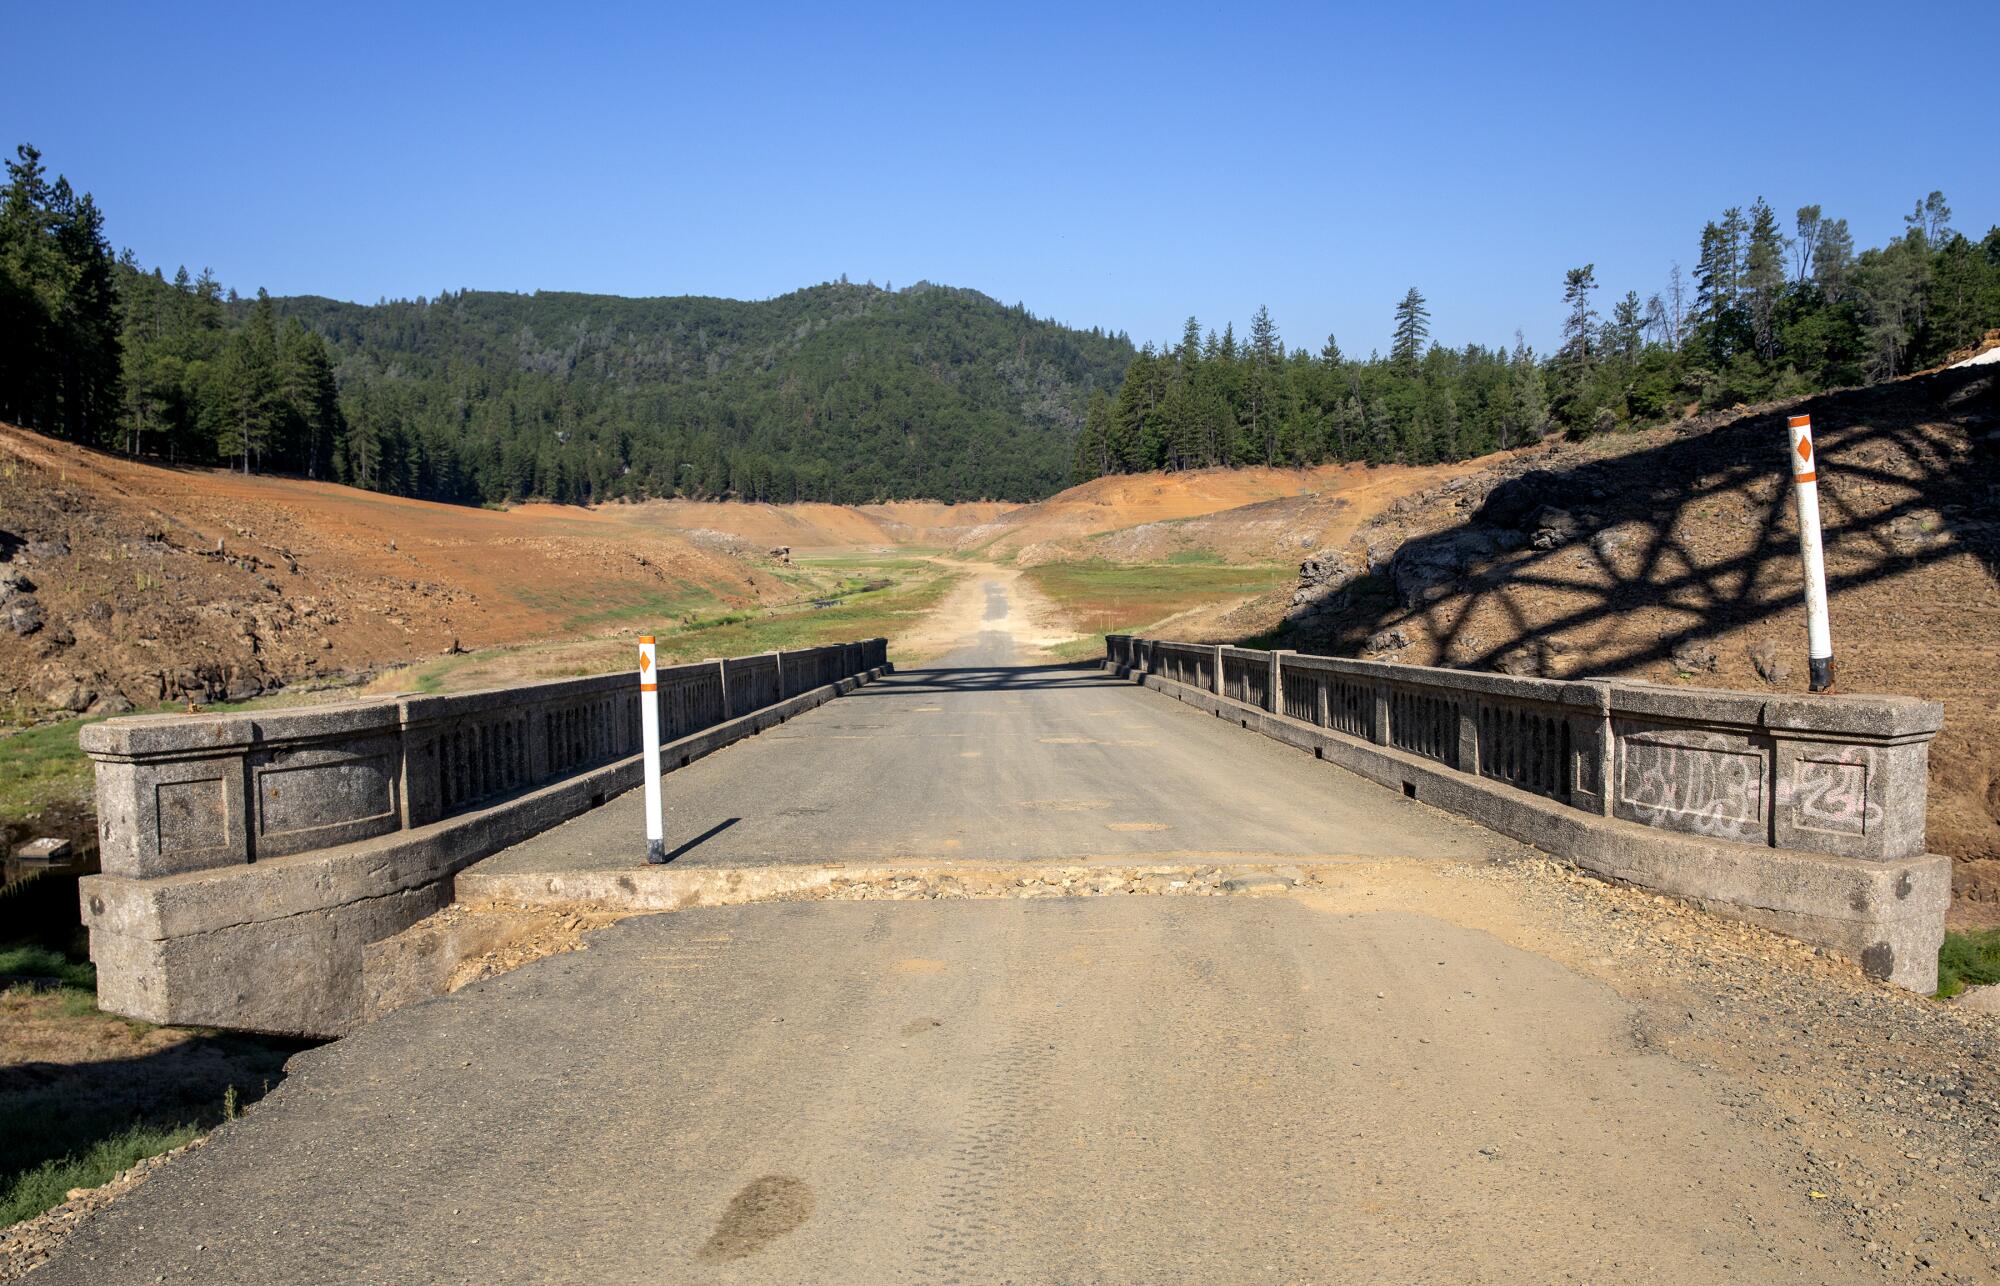 An old roadway and bridge revealed by receding water levels on Lake Shasta.